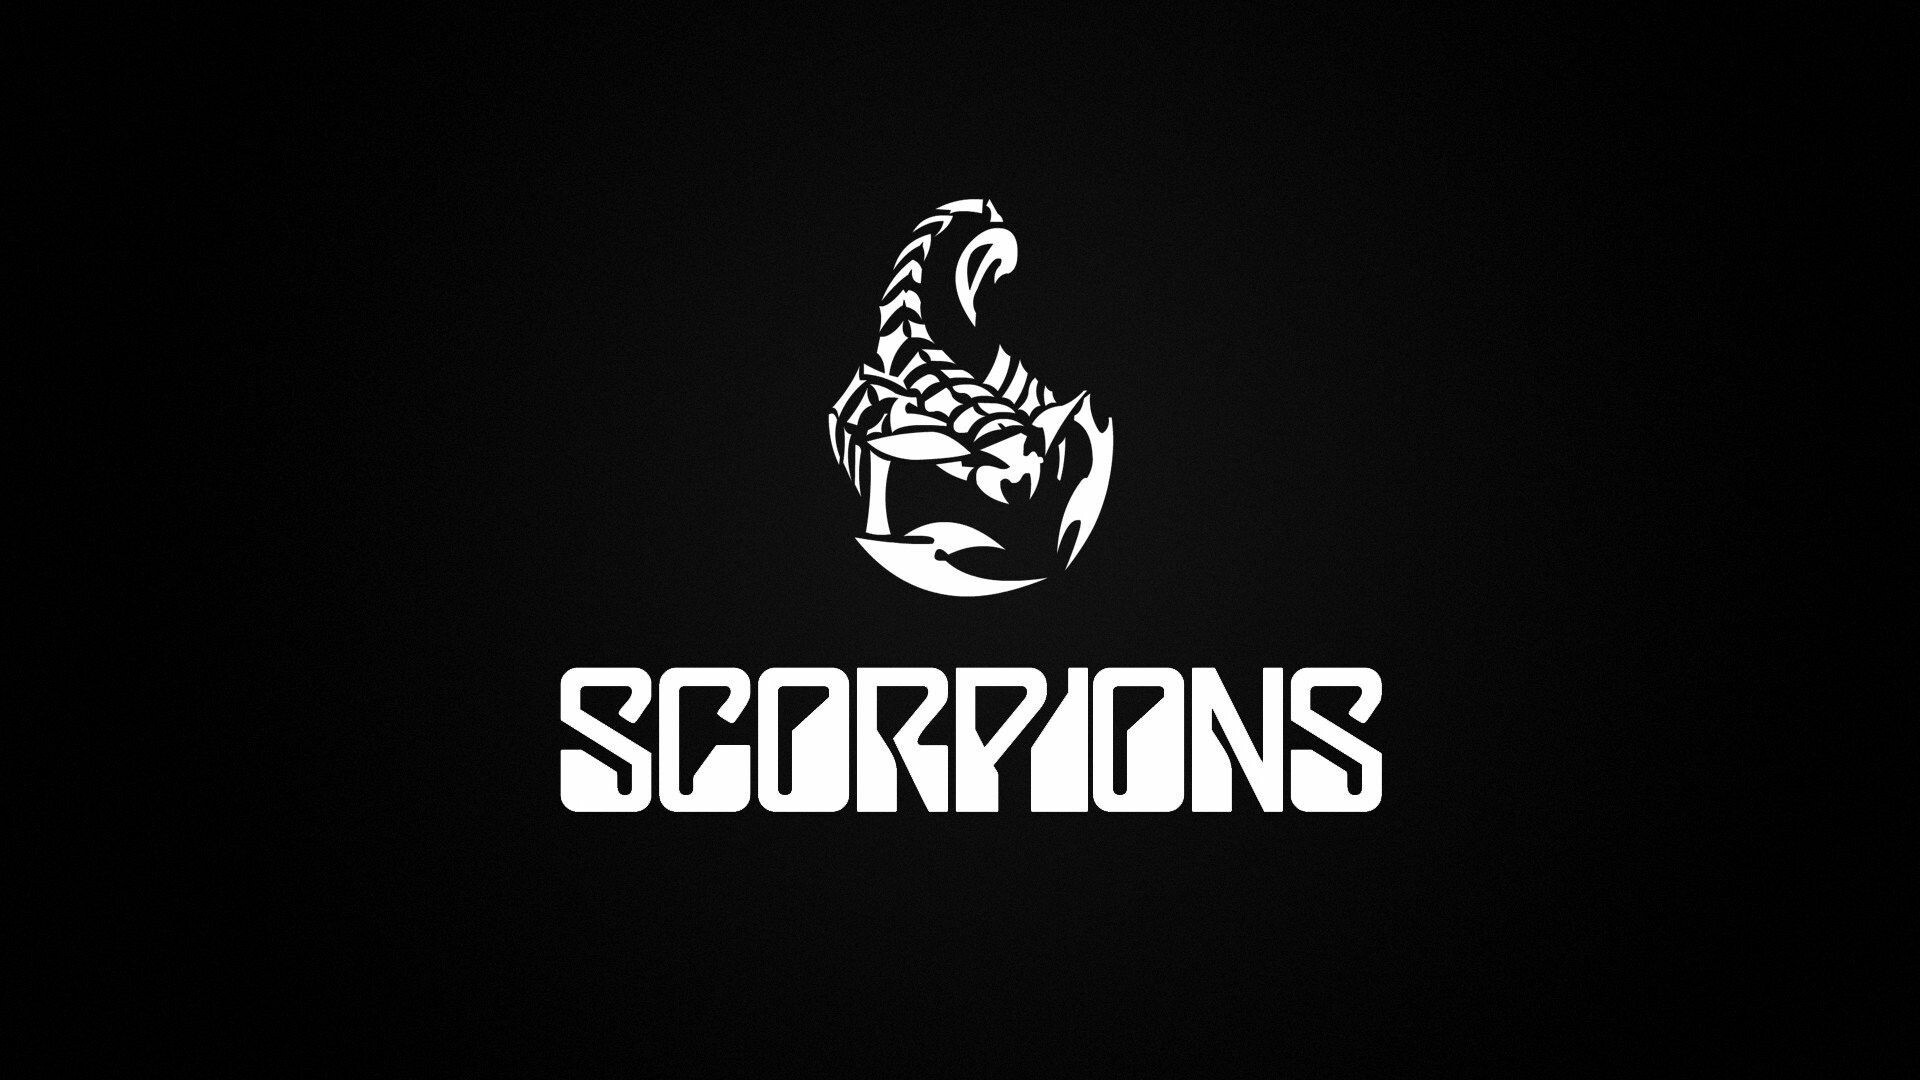 Scorpions band, Rock legends, Iconic wallpapers, Musical inspiration, 1920x1080 Full HD Desktop